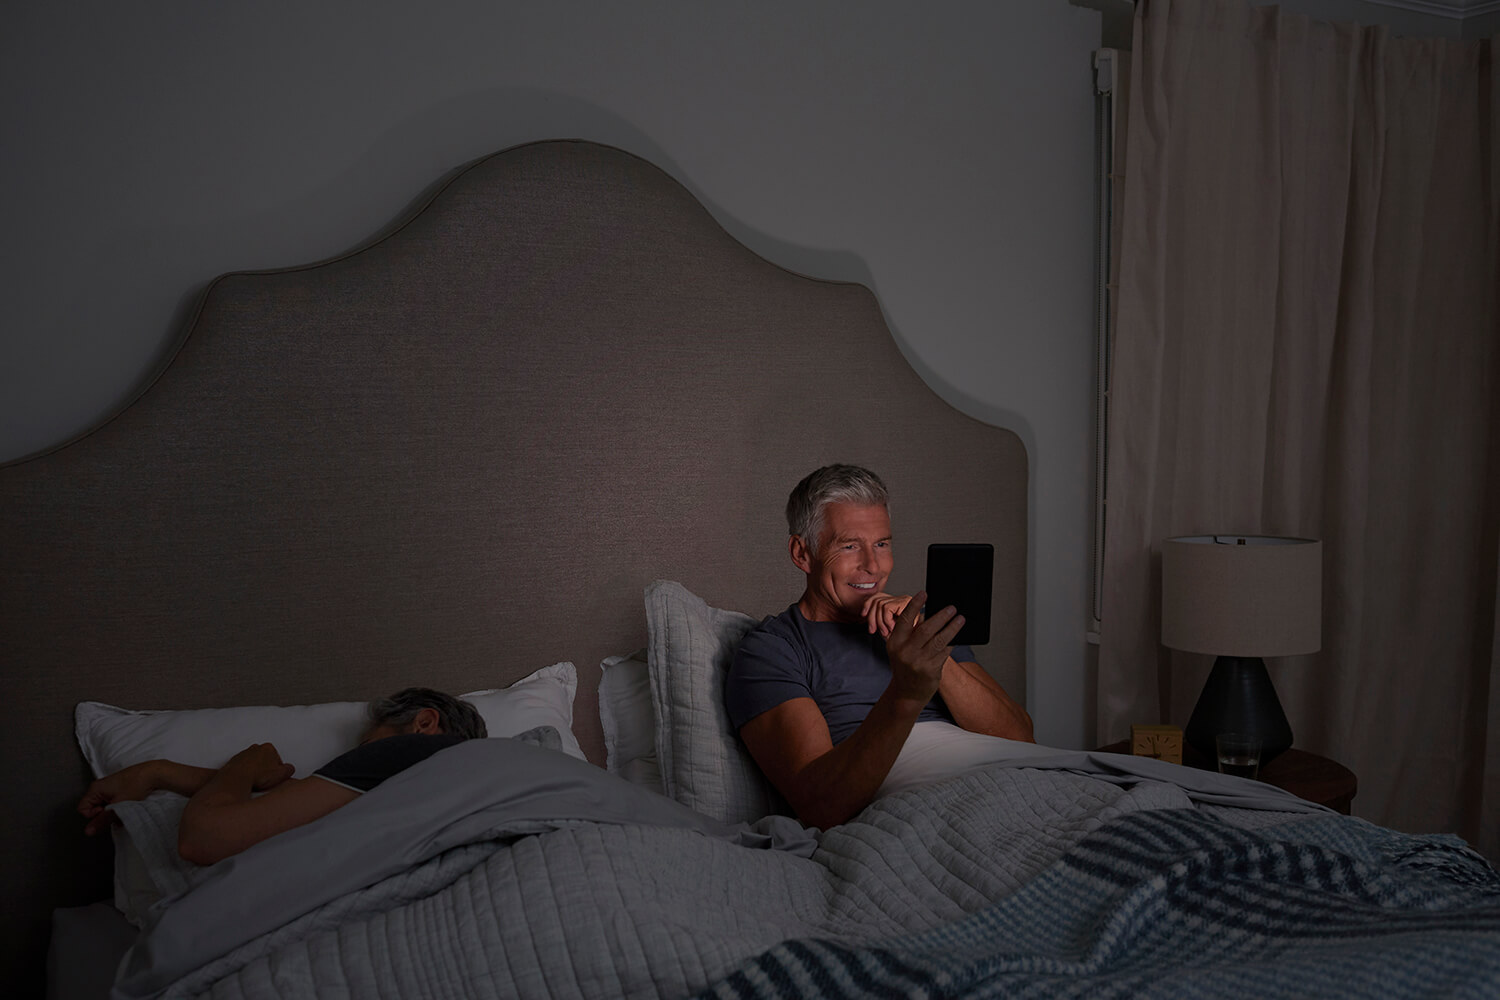 Man reading on an Amazon Kindle in bed in the dark